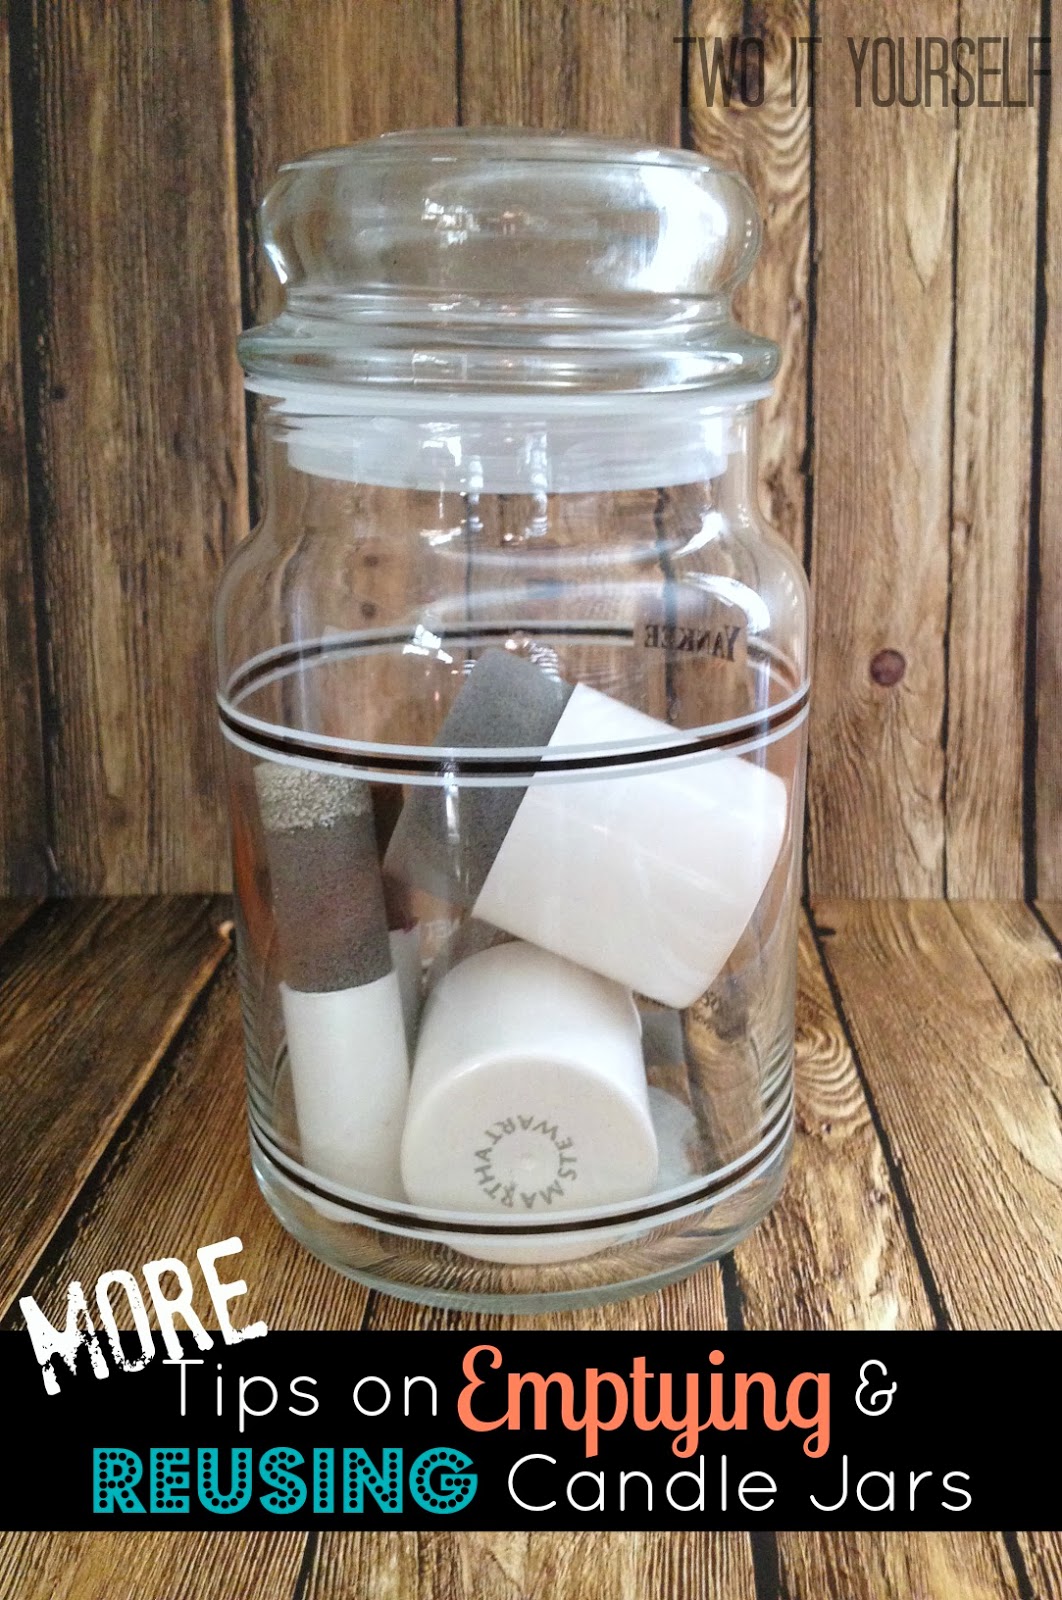 Here's What to Do With Old Candle Jars, Once All the Wax Has Melted